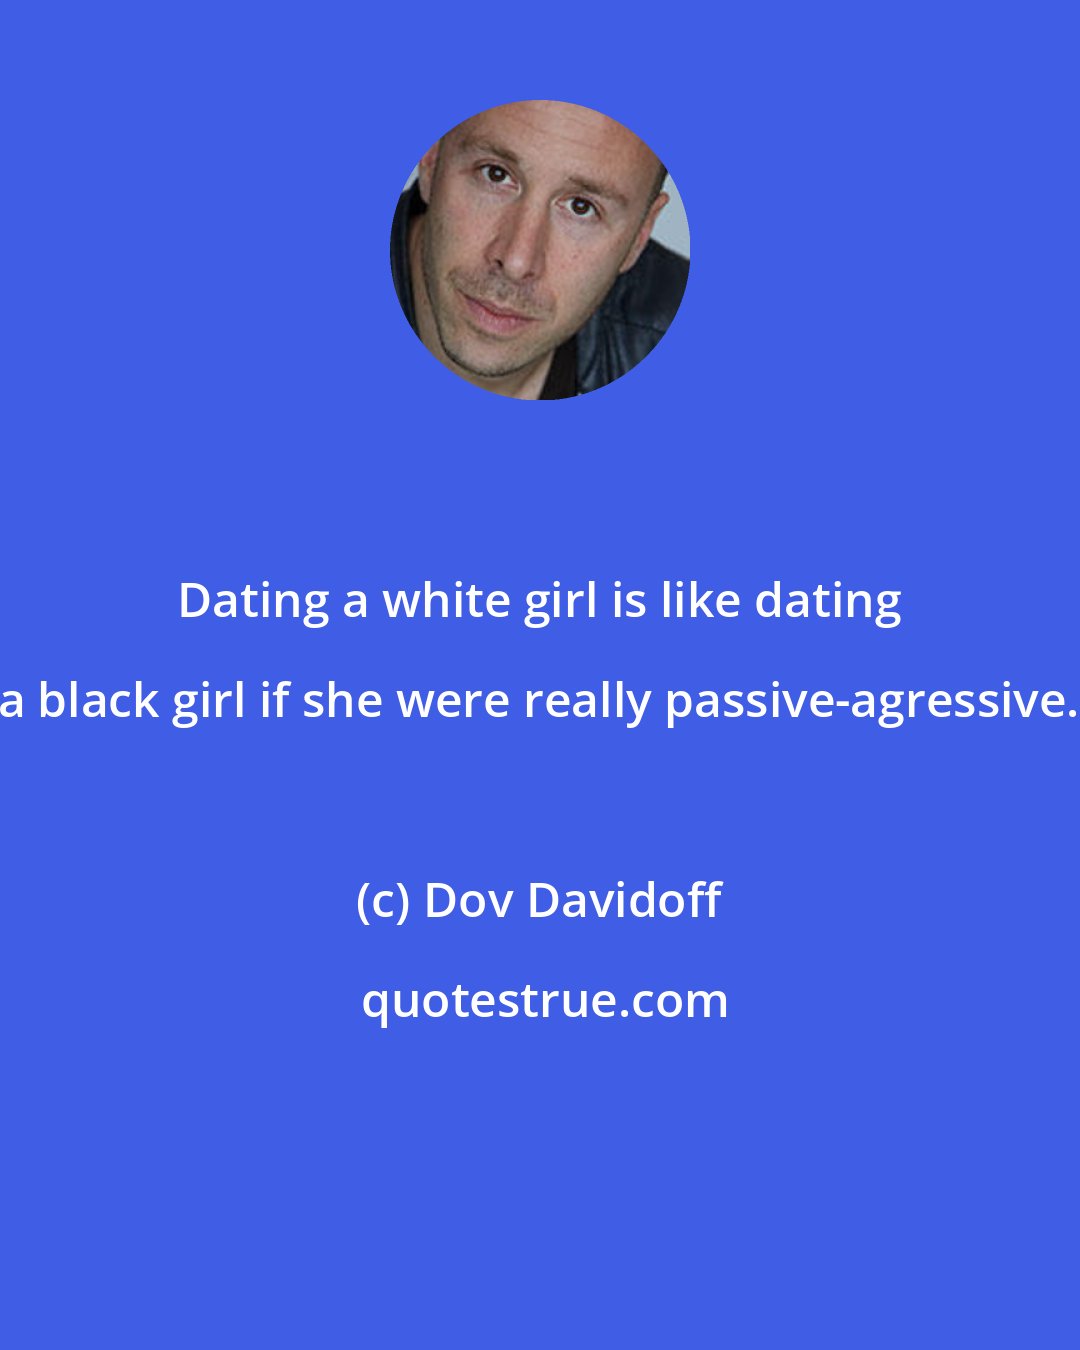 Dov Davidoff: Dating a white girl is like dating a black girl if she were really passive-agressive.